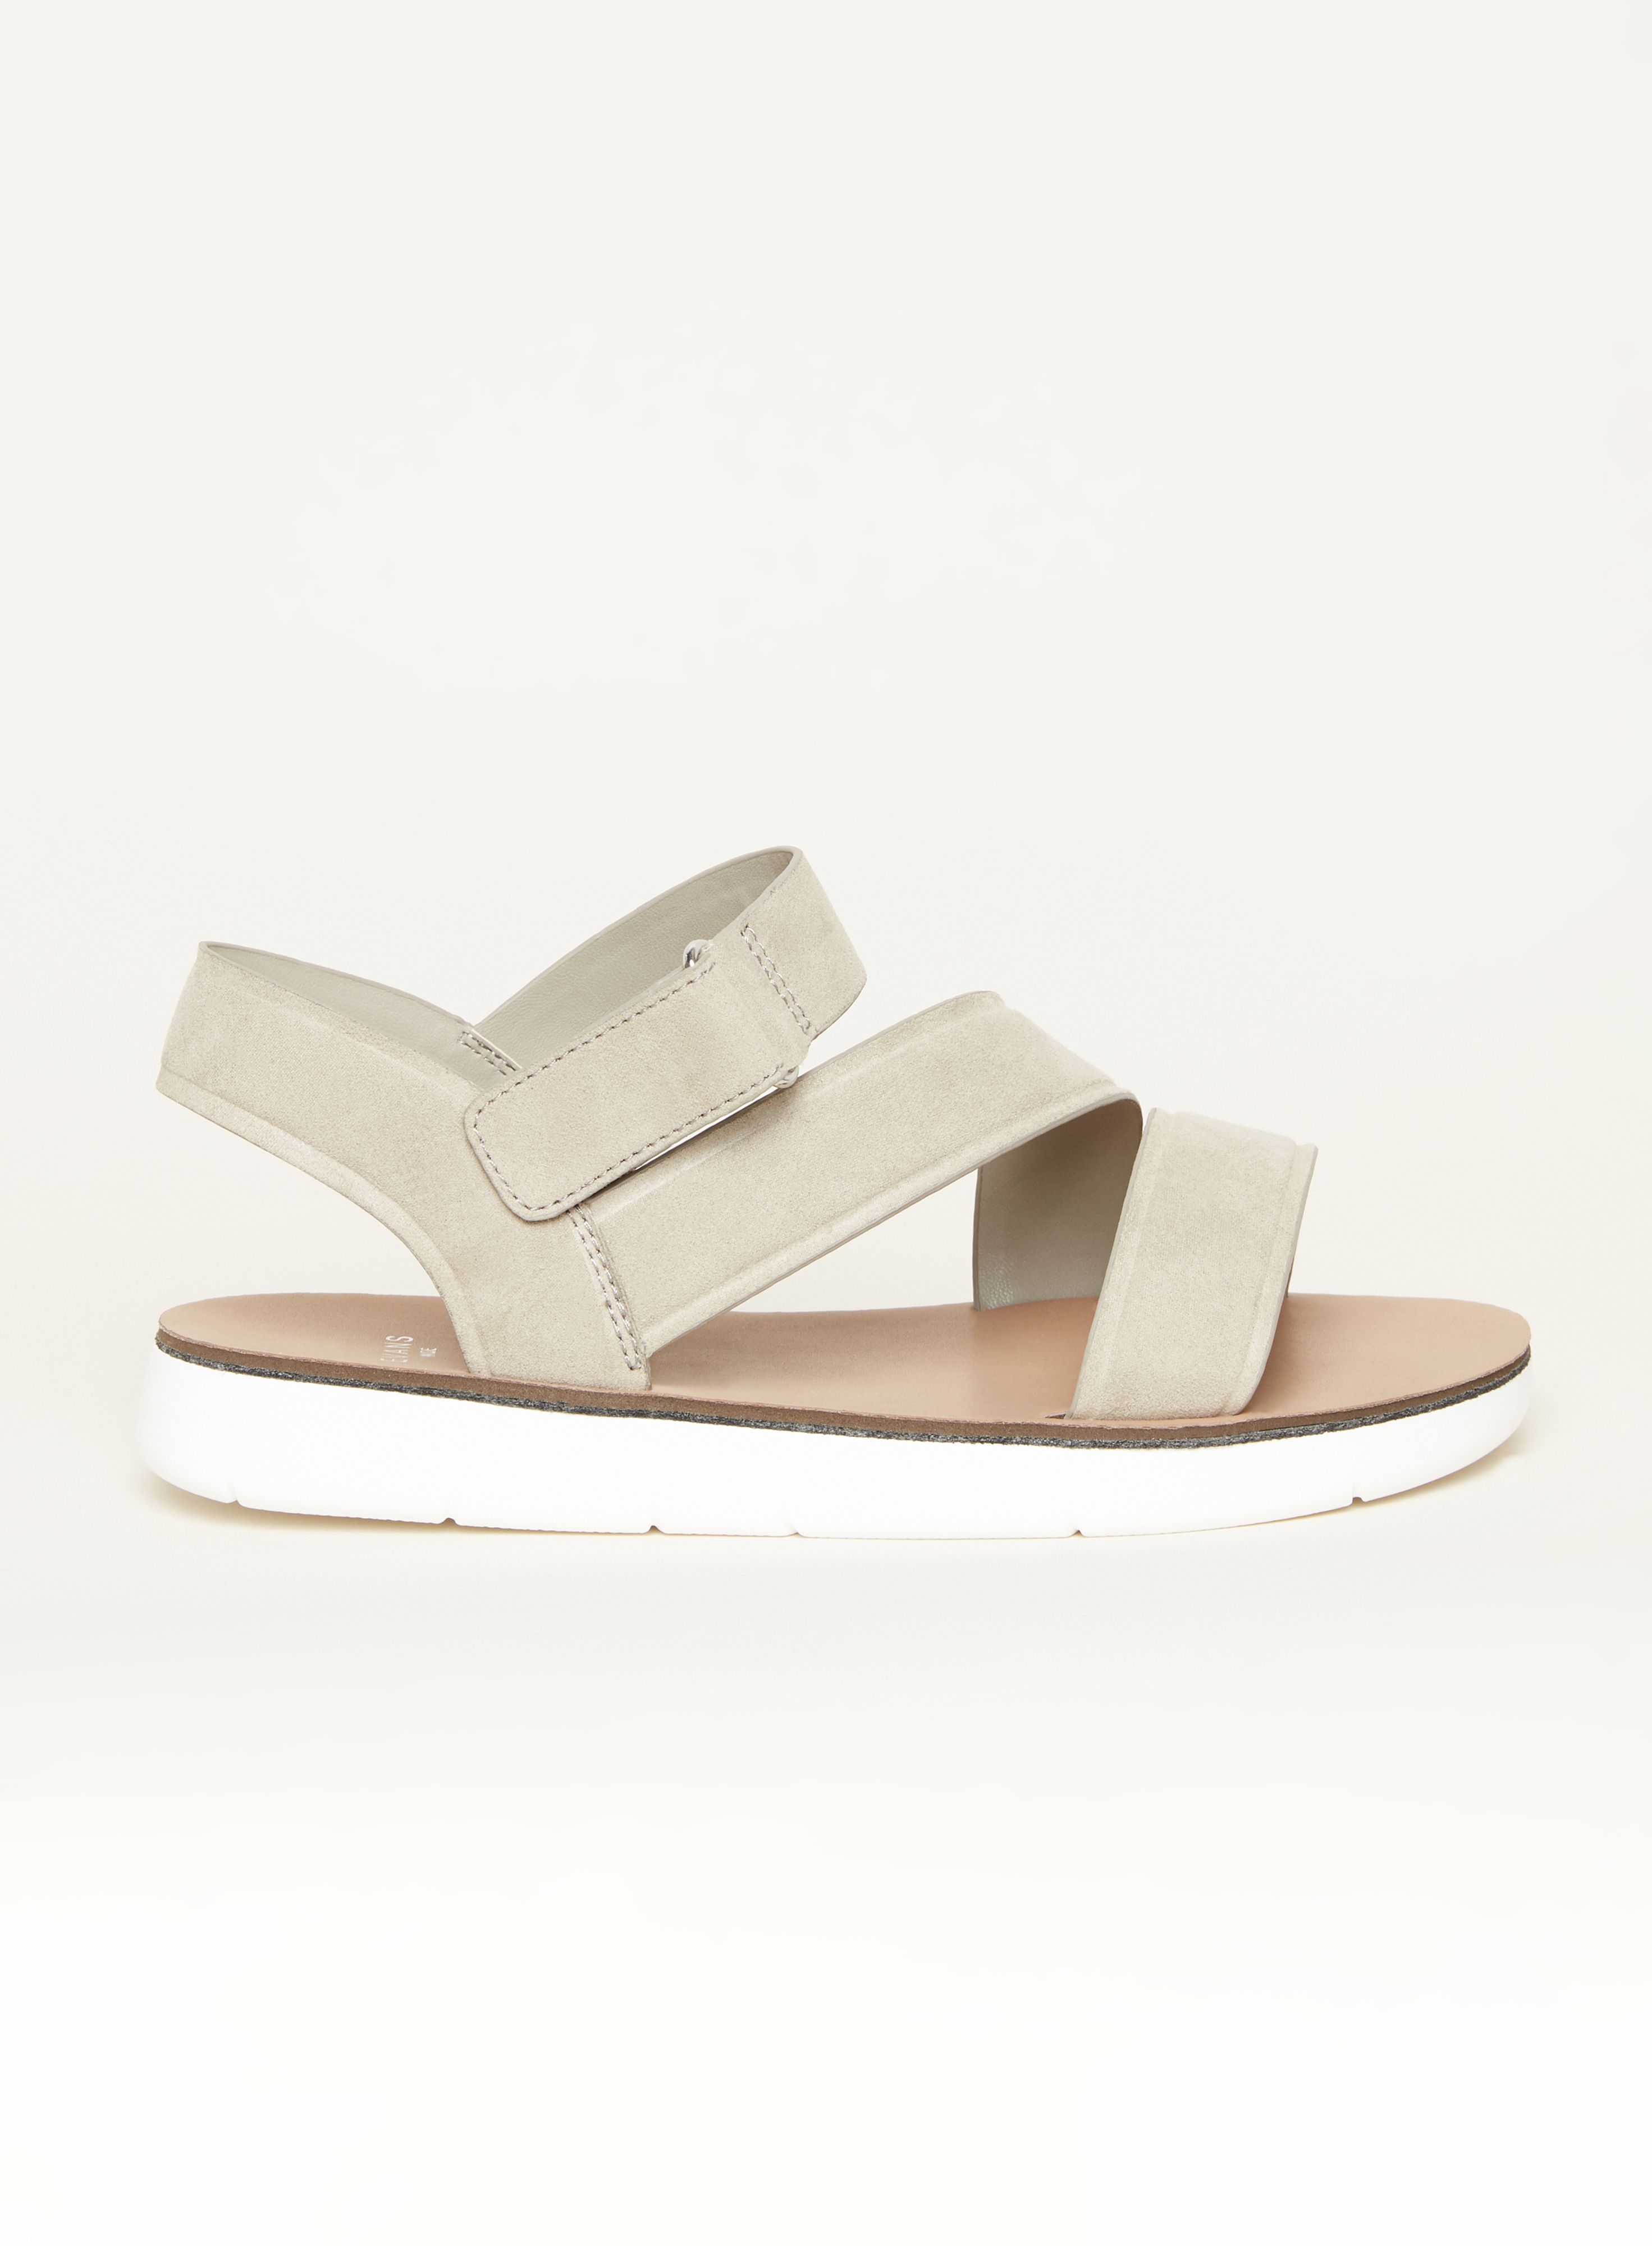 Combining practical comfort with trending style, the Cross Strap Sporty Sandal is bound to become your summer go-to. Finished with thick strapping and a chunky sole, you'll be reaching for these sandals every weekend! Key Features Include: - Wide fit - Side velcro closure - Flat sole - Faux-suede fabrication Team with frayed shorts and a slogan tee for pared back summer style.